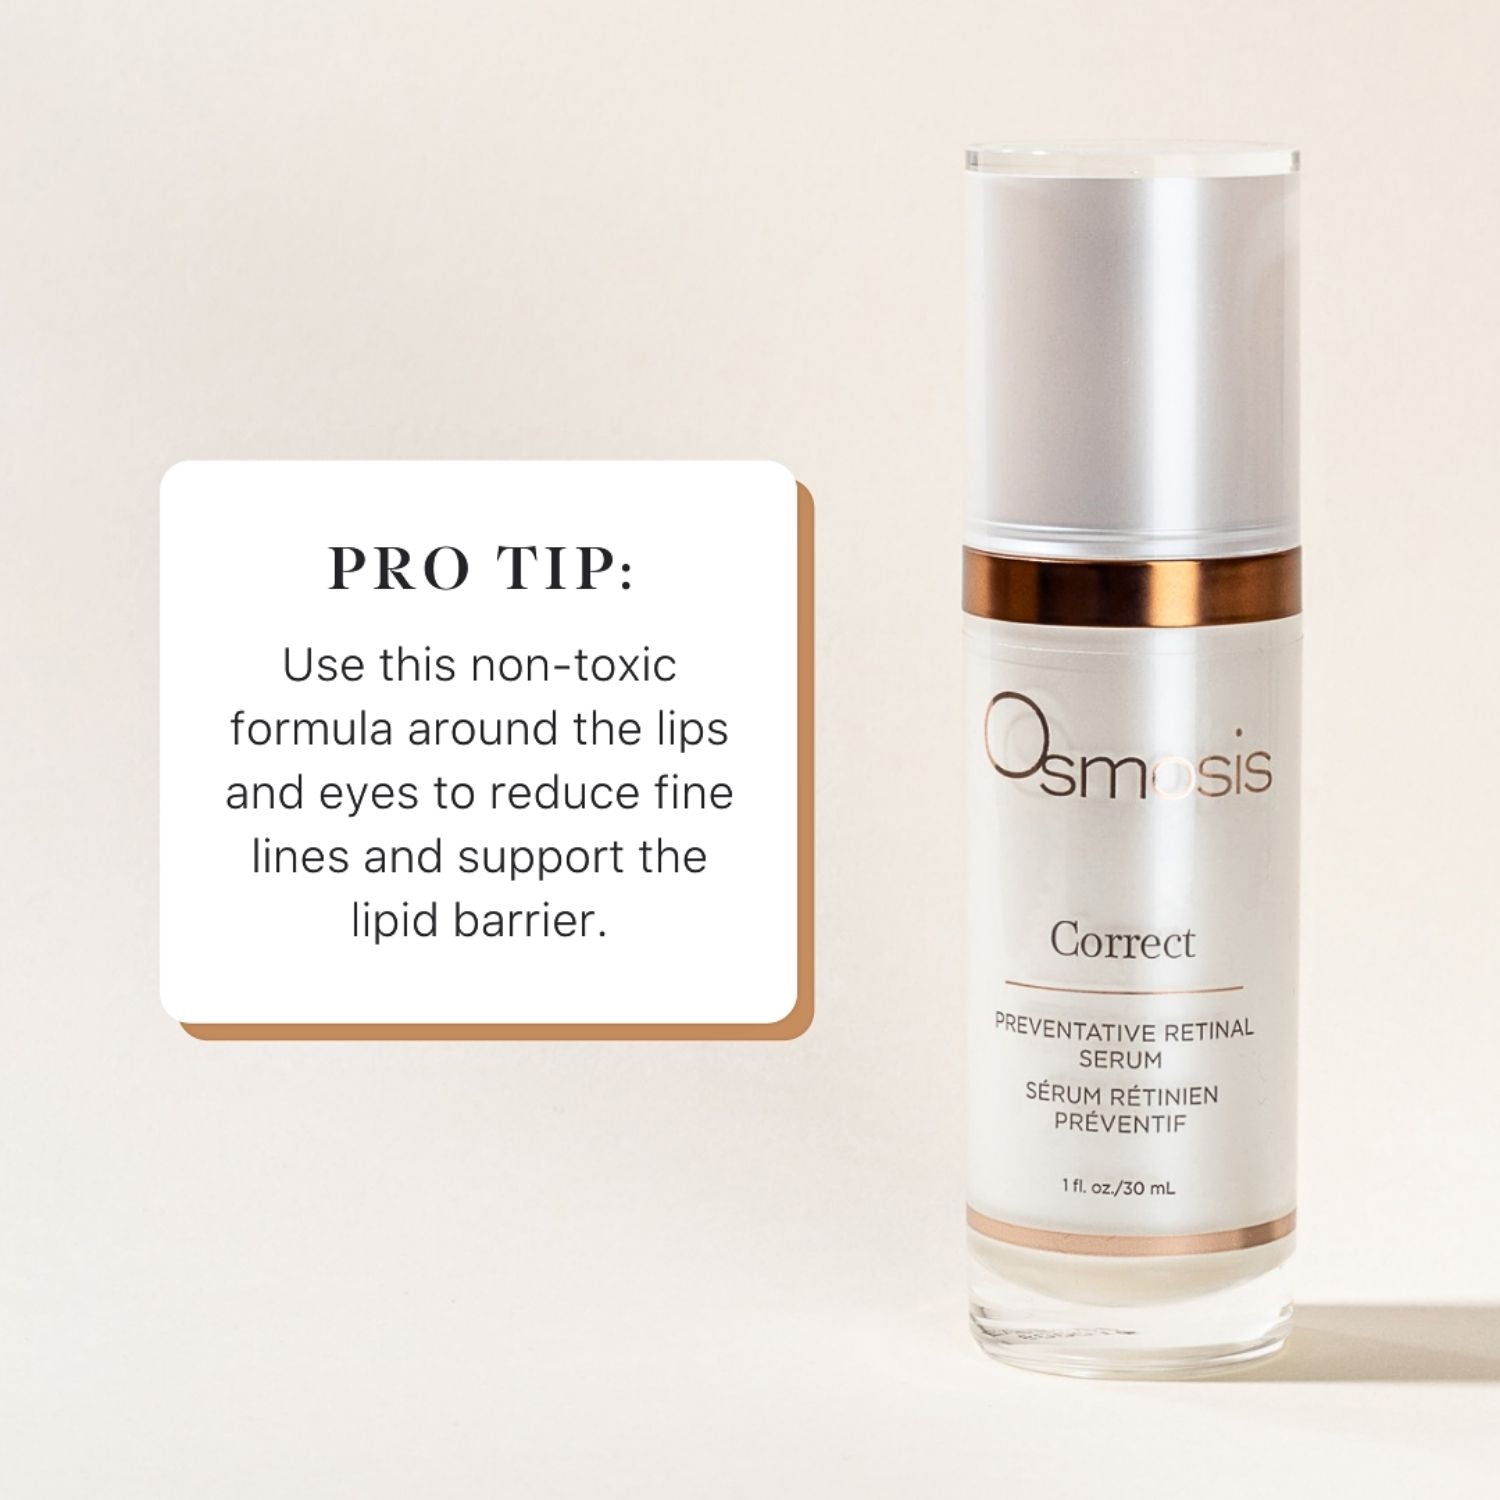 bottle of osmosis correct skincare with pro tip text next to it